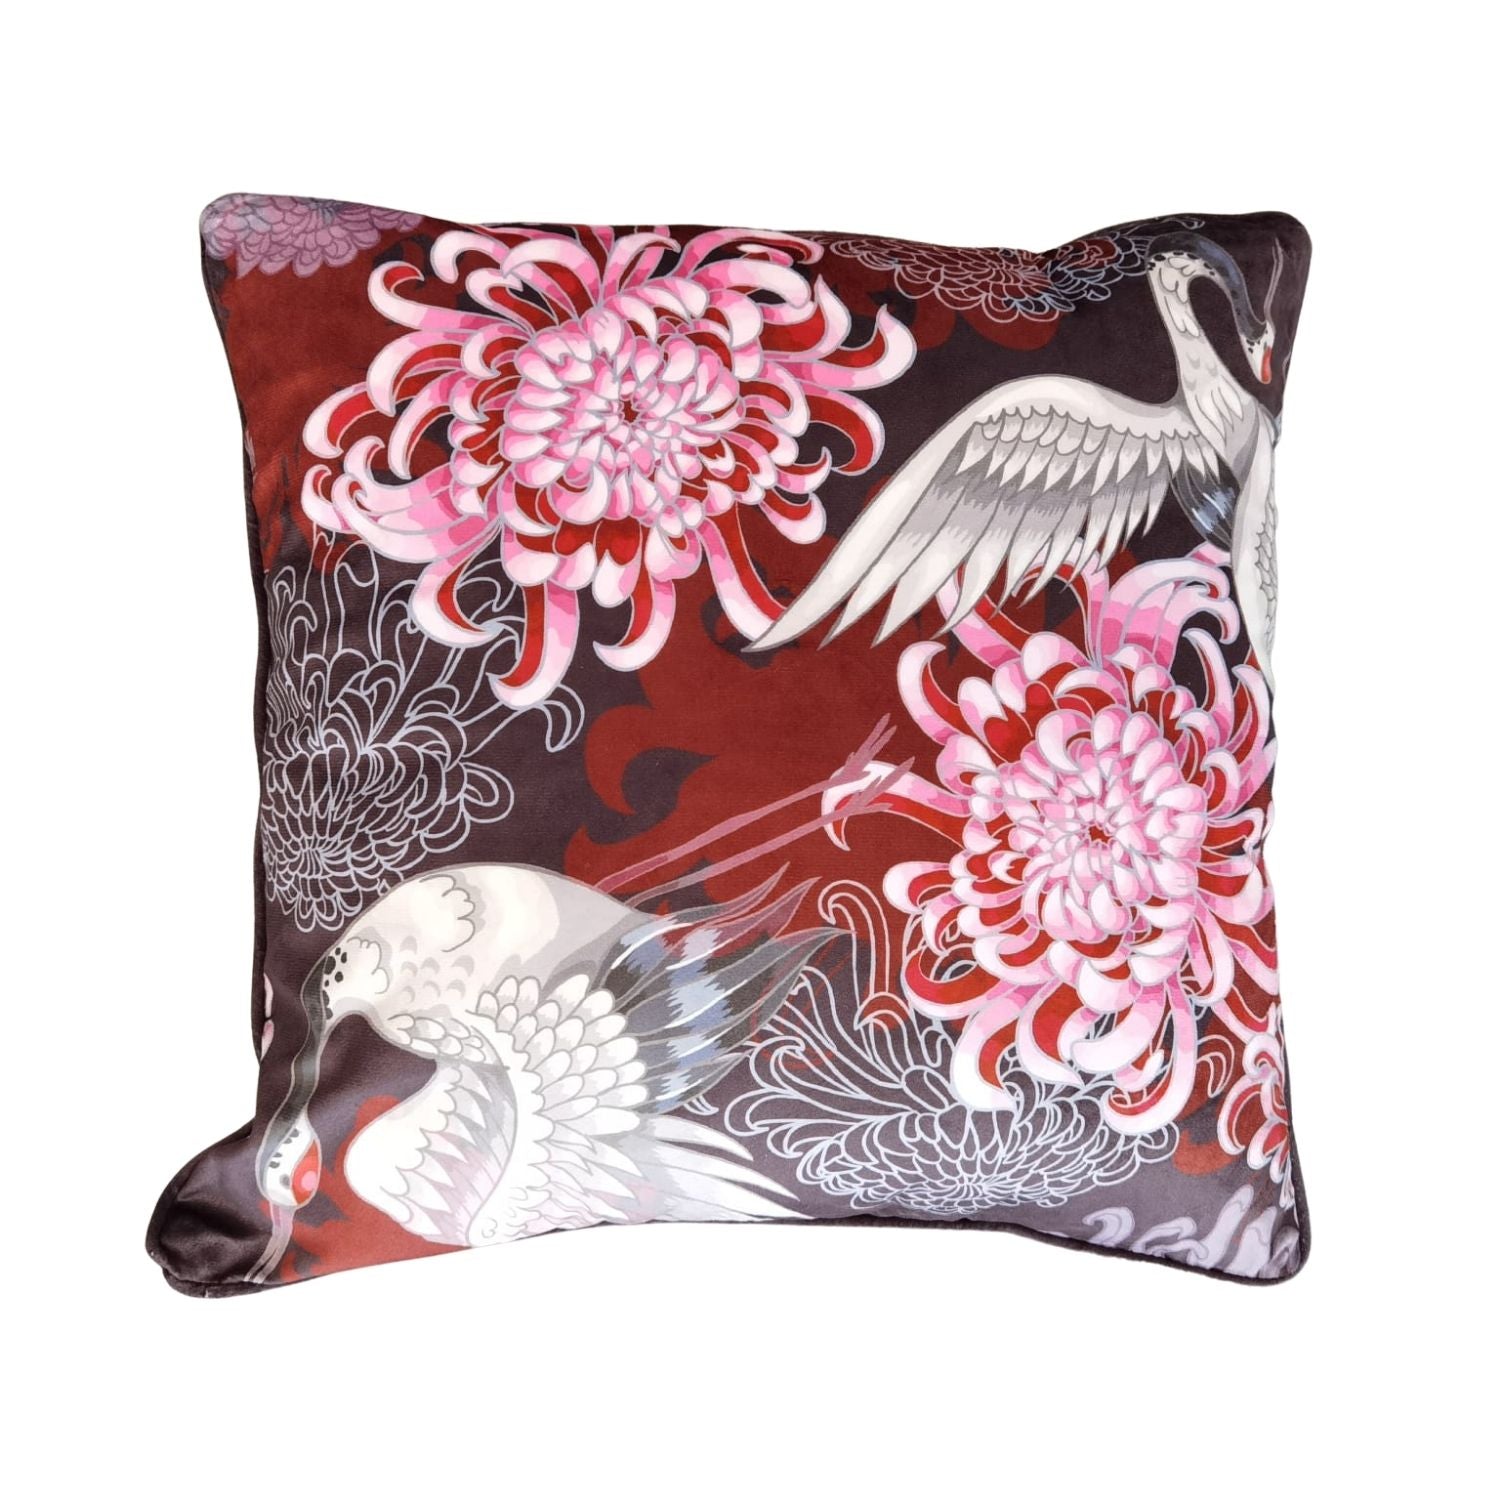 The Home Living Room Printed Piped Cushion - 18x18&